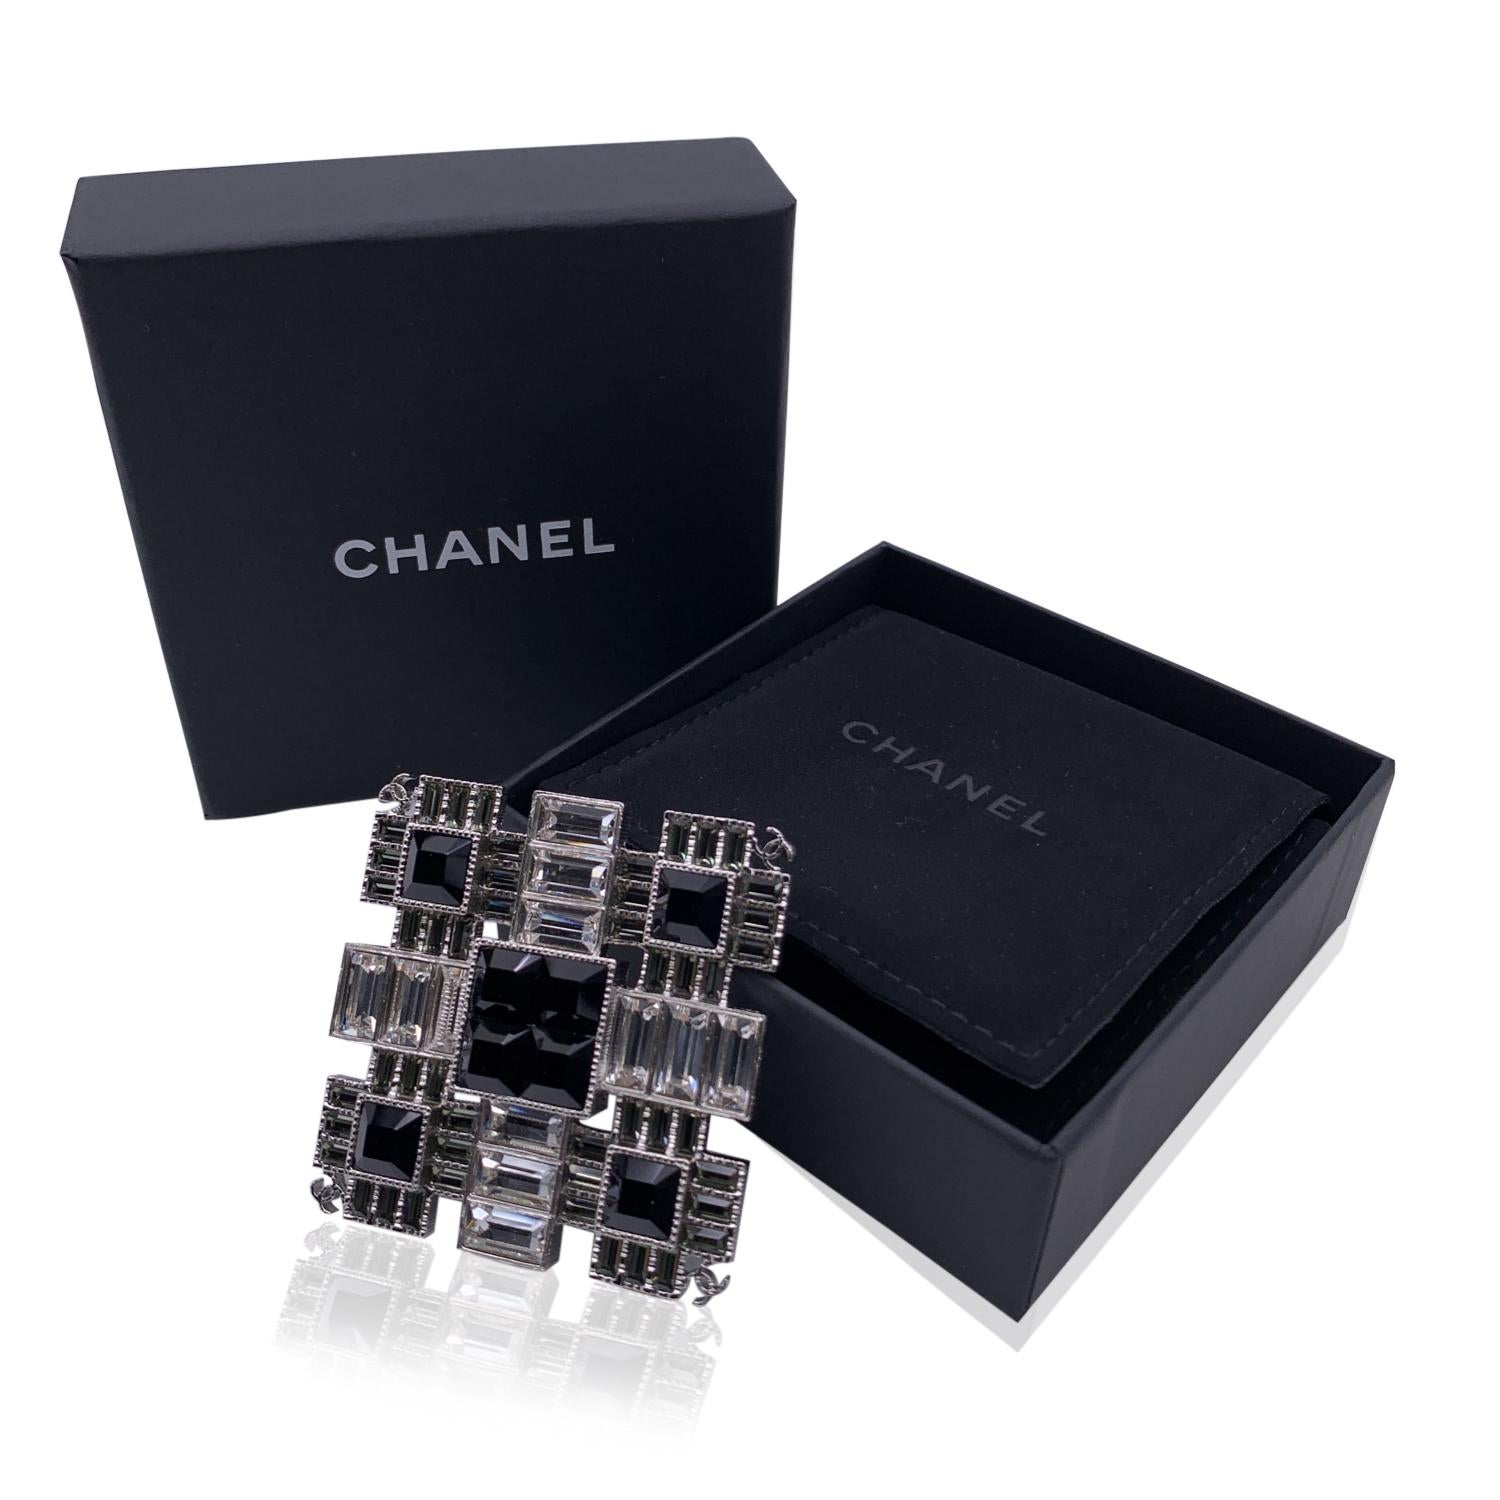 Chanel Square Pin Brooch. Silver metal with squared and rectangular crystals in black and clear/white colors. Small CC - CHANEL logos on corners. Safety pin closure. Measurements (HxL) 2 x 2 inches - 5.1 x 5.1 cm. 'CHANEL - G19 CC K- Made in Italy'